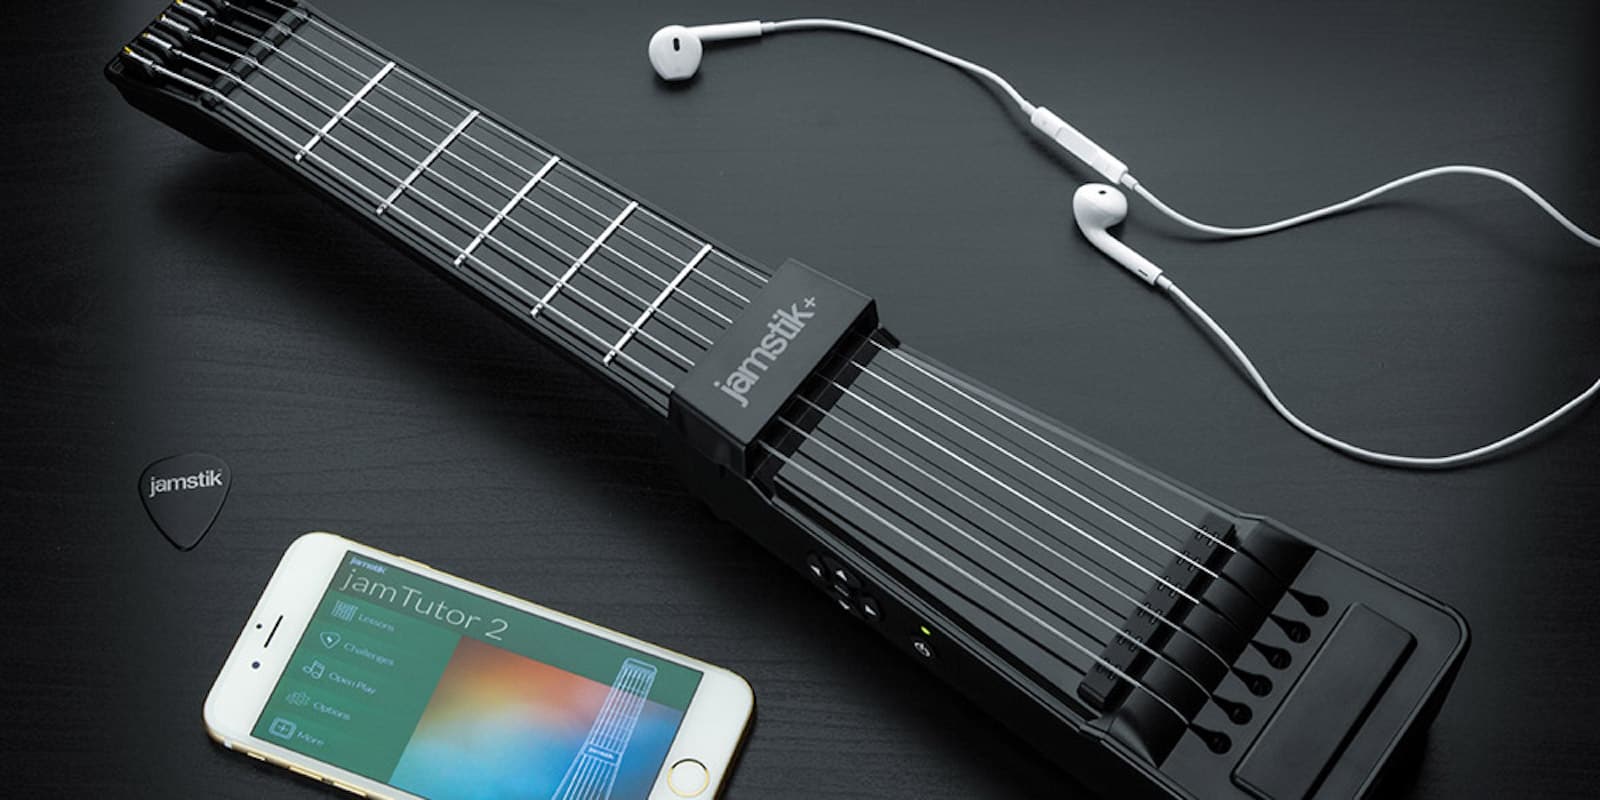 This combination of app and digital axe makes learning guitar extra portable.